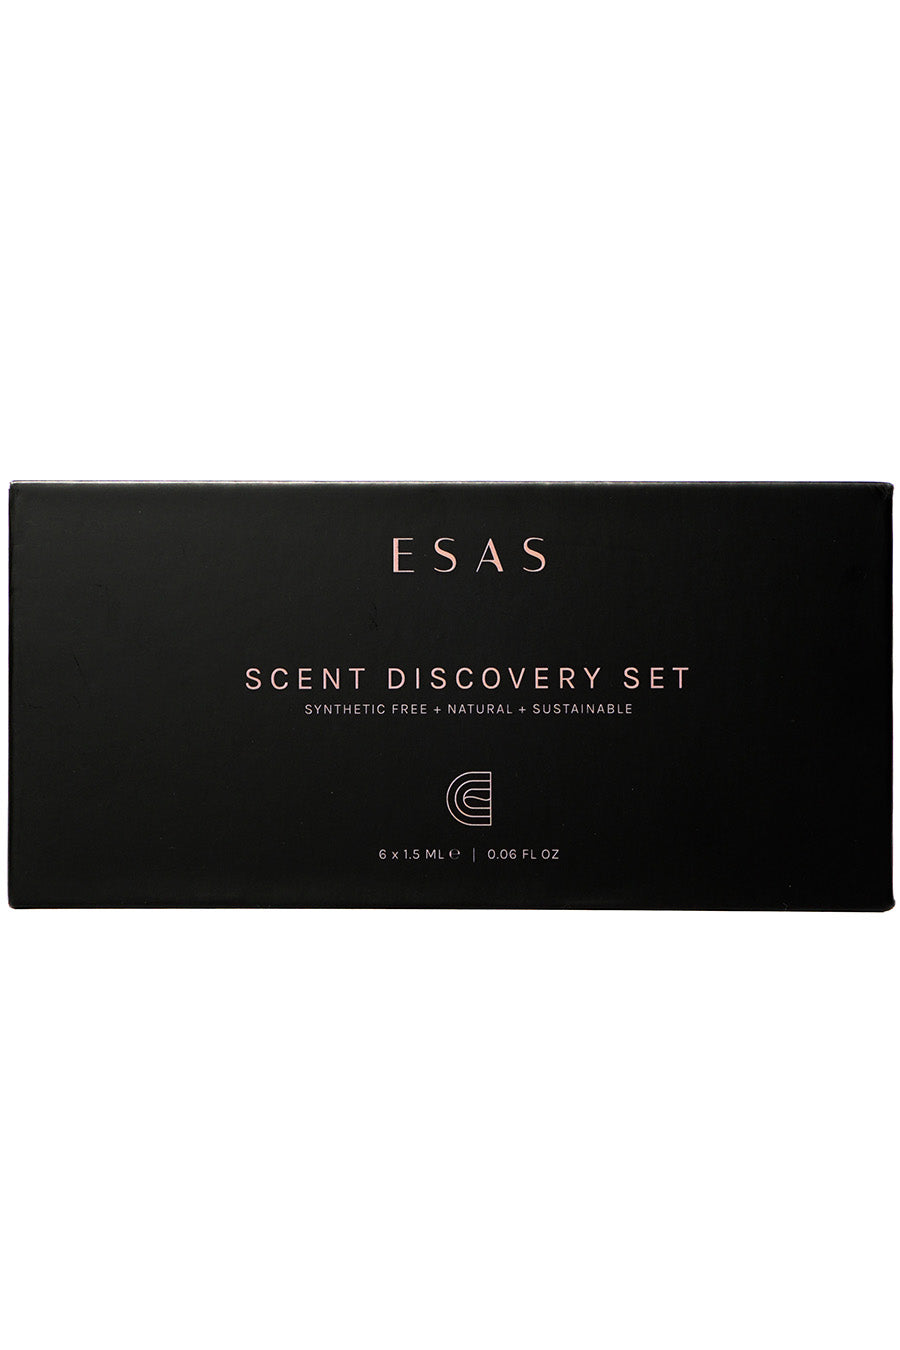 Scent Discovery Set - Sold out! Pre-order for May 3rd Ship!